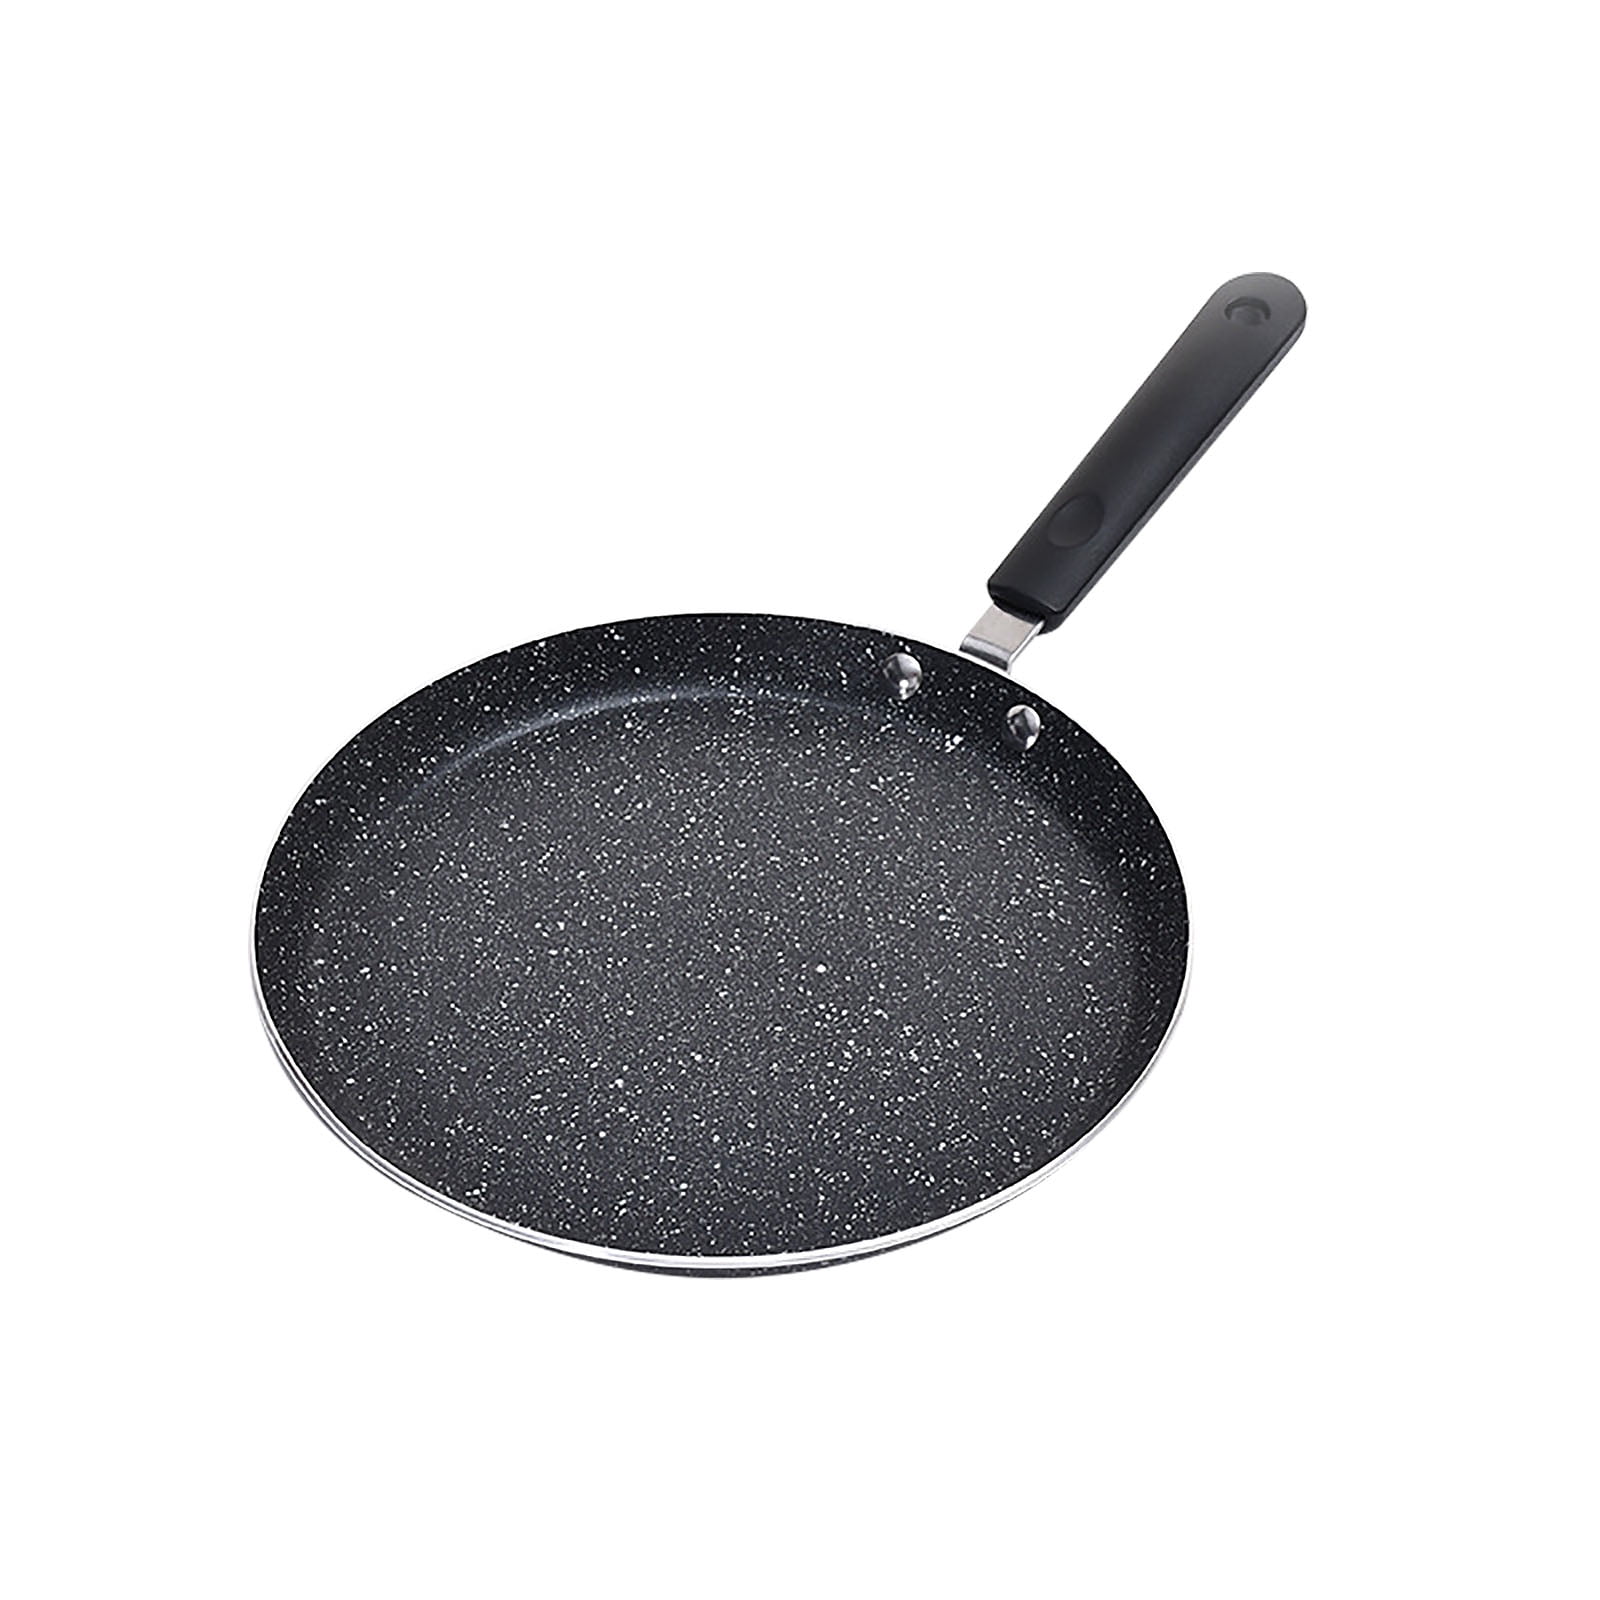 3-in-1 Nonstick Pan Divided Grill Frying Pan, Heat Resistant Handle 3  Section Skillet Egg Frying Pan 11.4 Inch - Black - Bed Bath & Beyond -  37563486